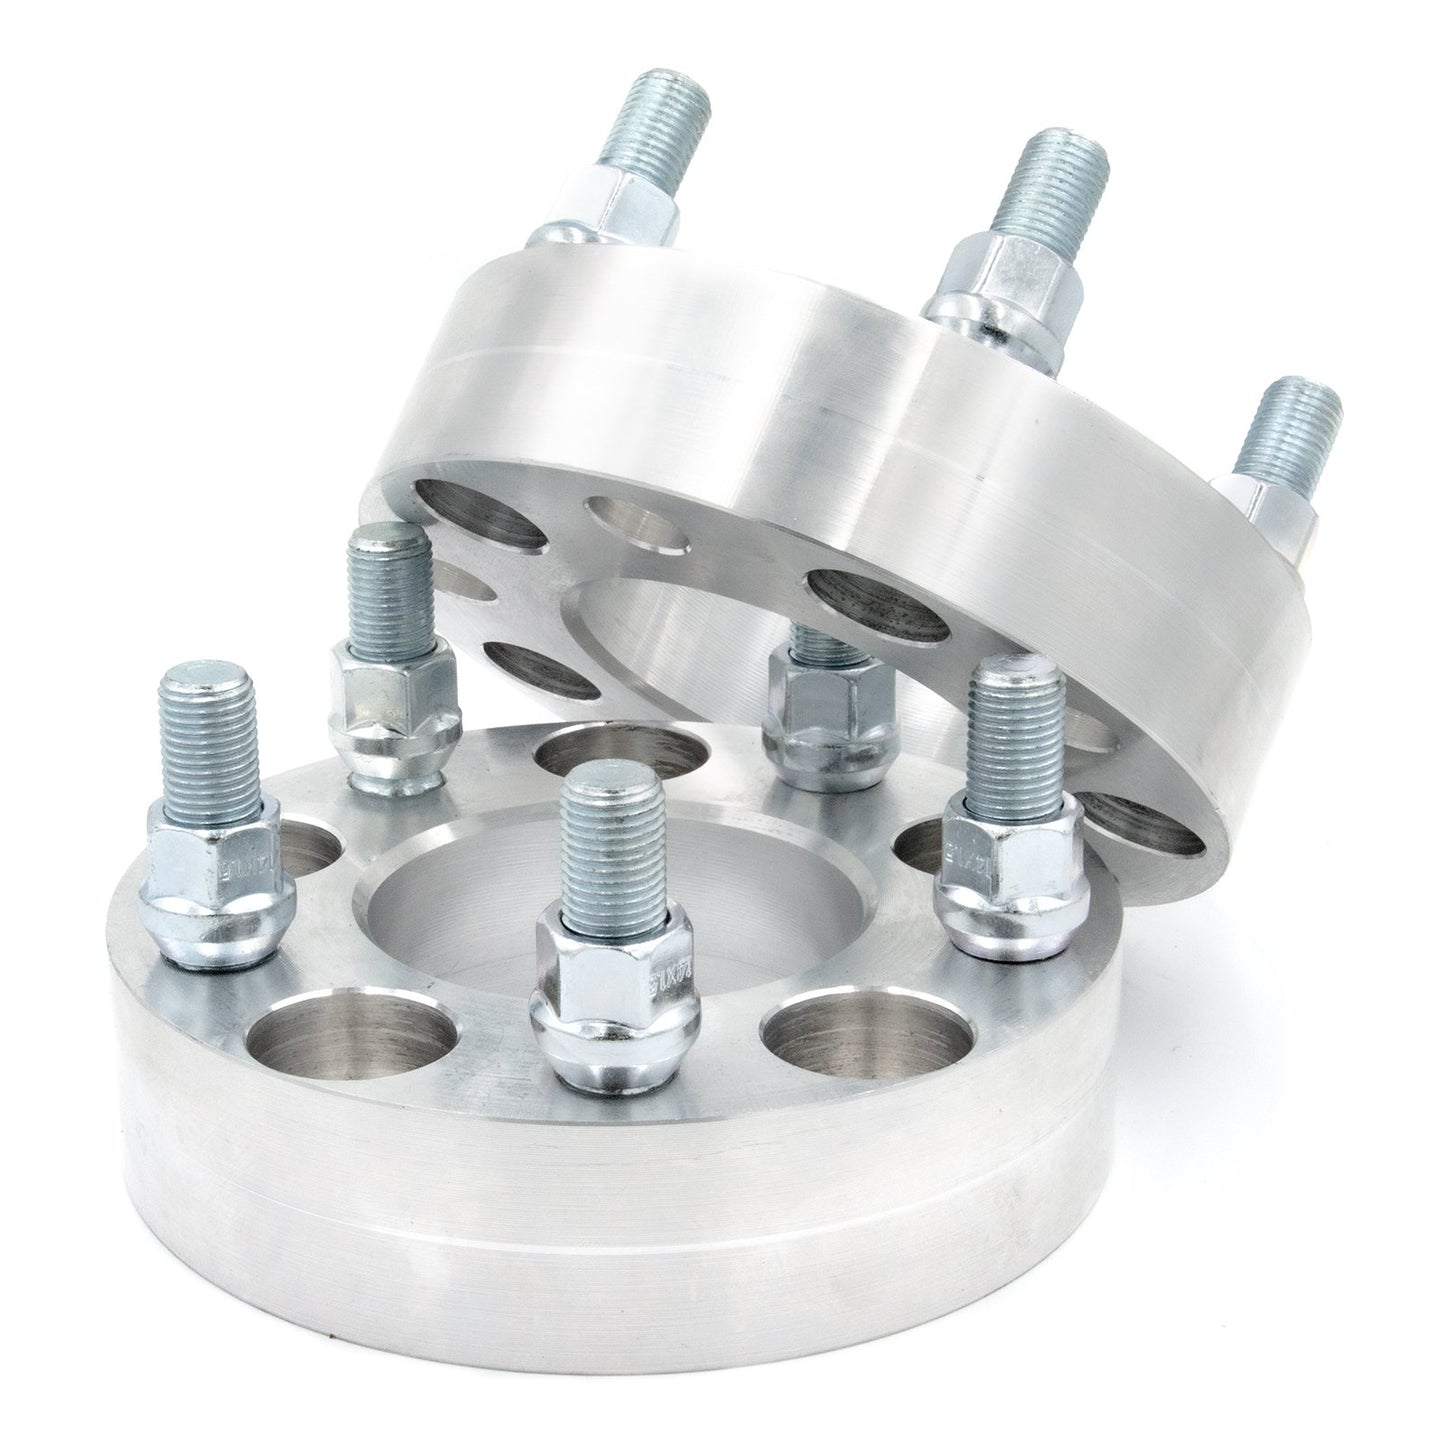 5x120 to 5x150 Wheel Spacer/Adapter - Thickness: 3/4"- 4"